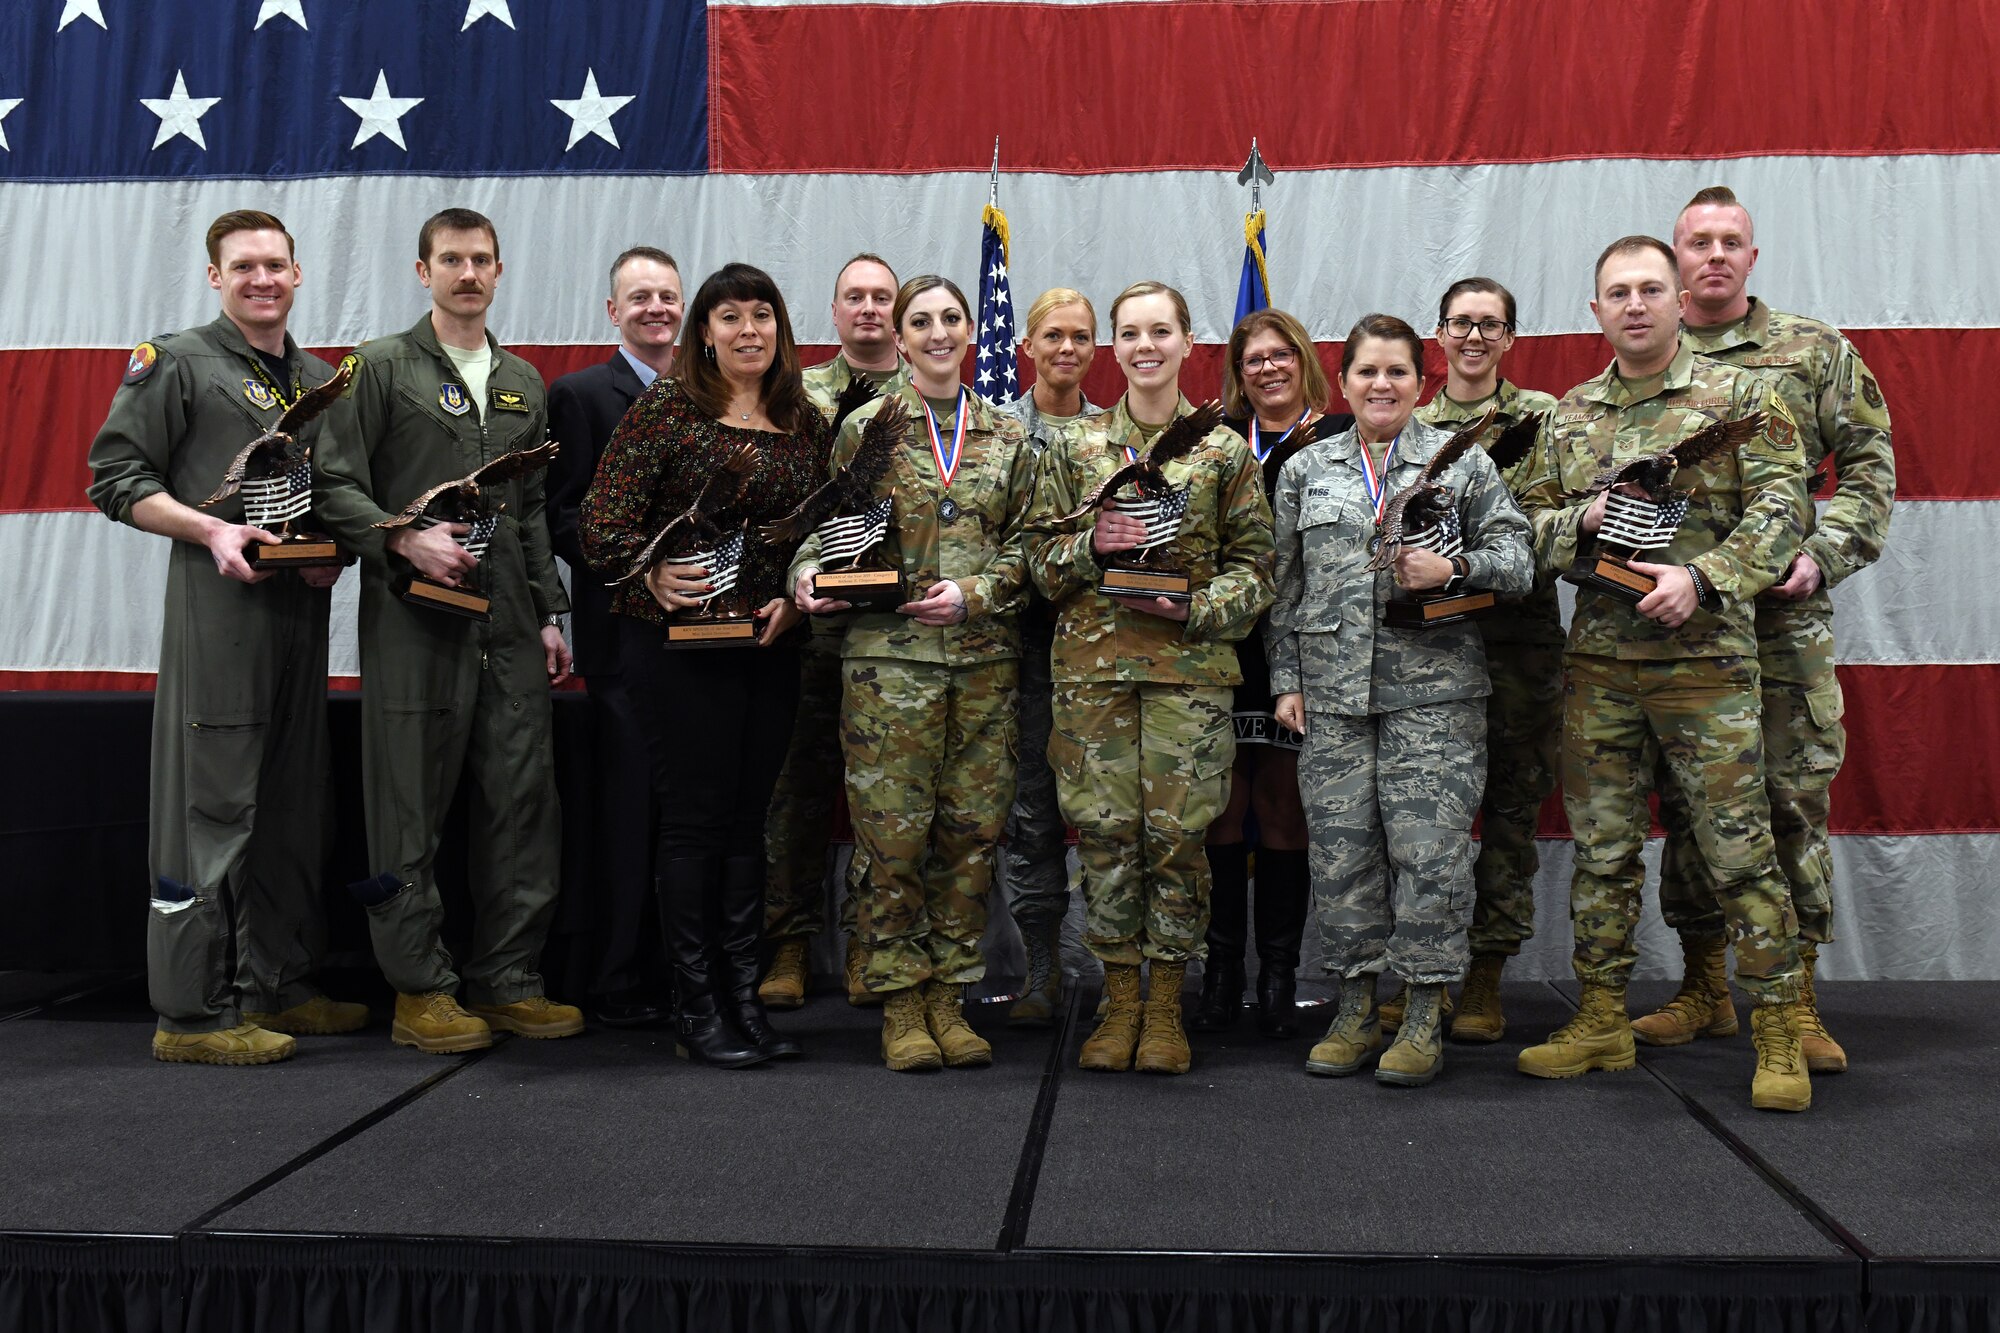 Winners from the 419th Fighter Wing's annual awards banquet take the stage Feb. 9 at Hill Air Force Base, Utah